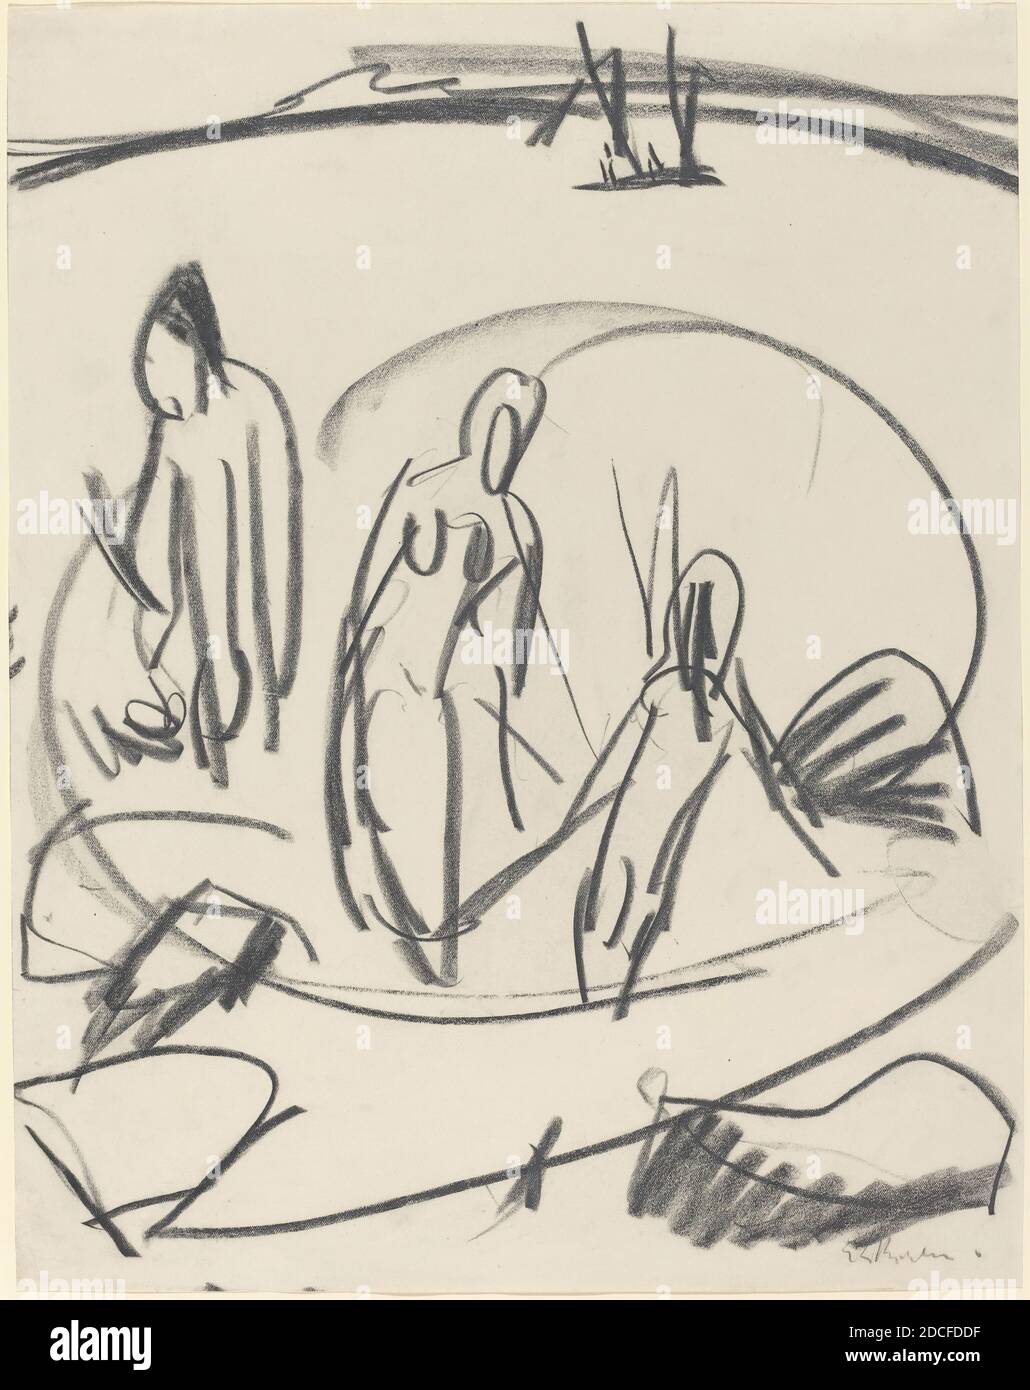 Ernst Ludwig Kirchner, (artist), German, 1880 - 1938, Three Bathers in the Sea, c. 1914, black crayon, overall: 68.1 x 37.6 cm (26 13/16 x 14 13/16 in Stock Photo